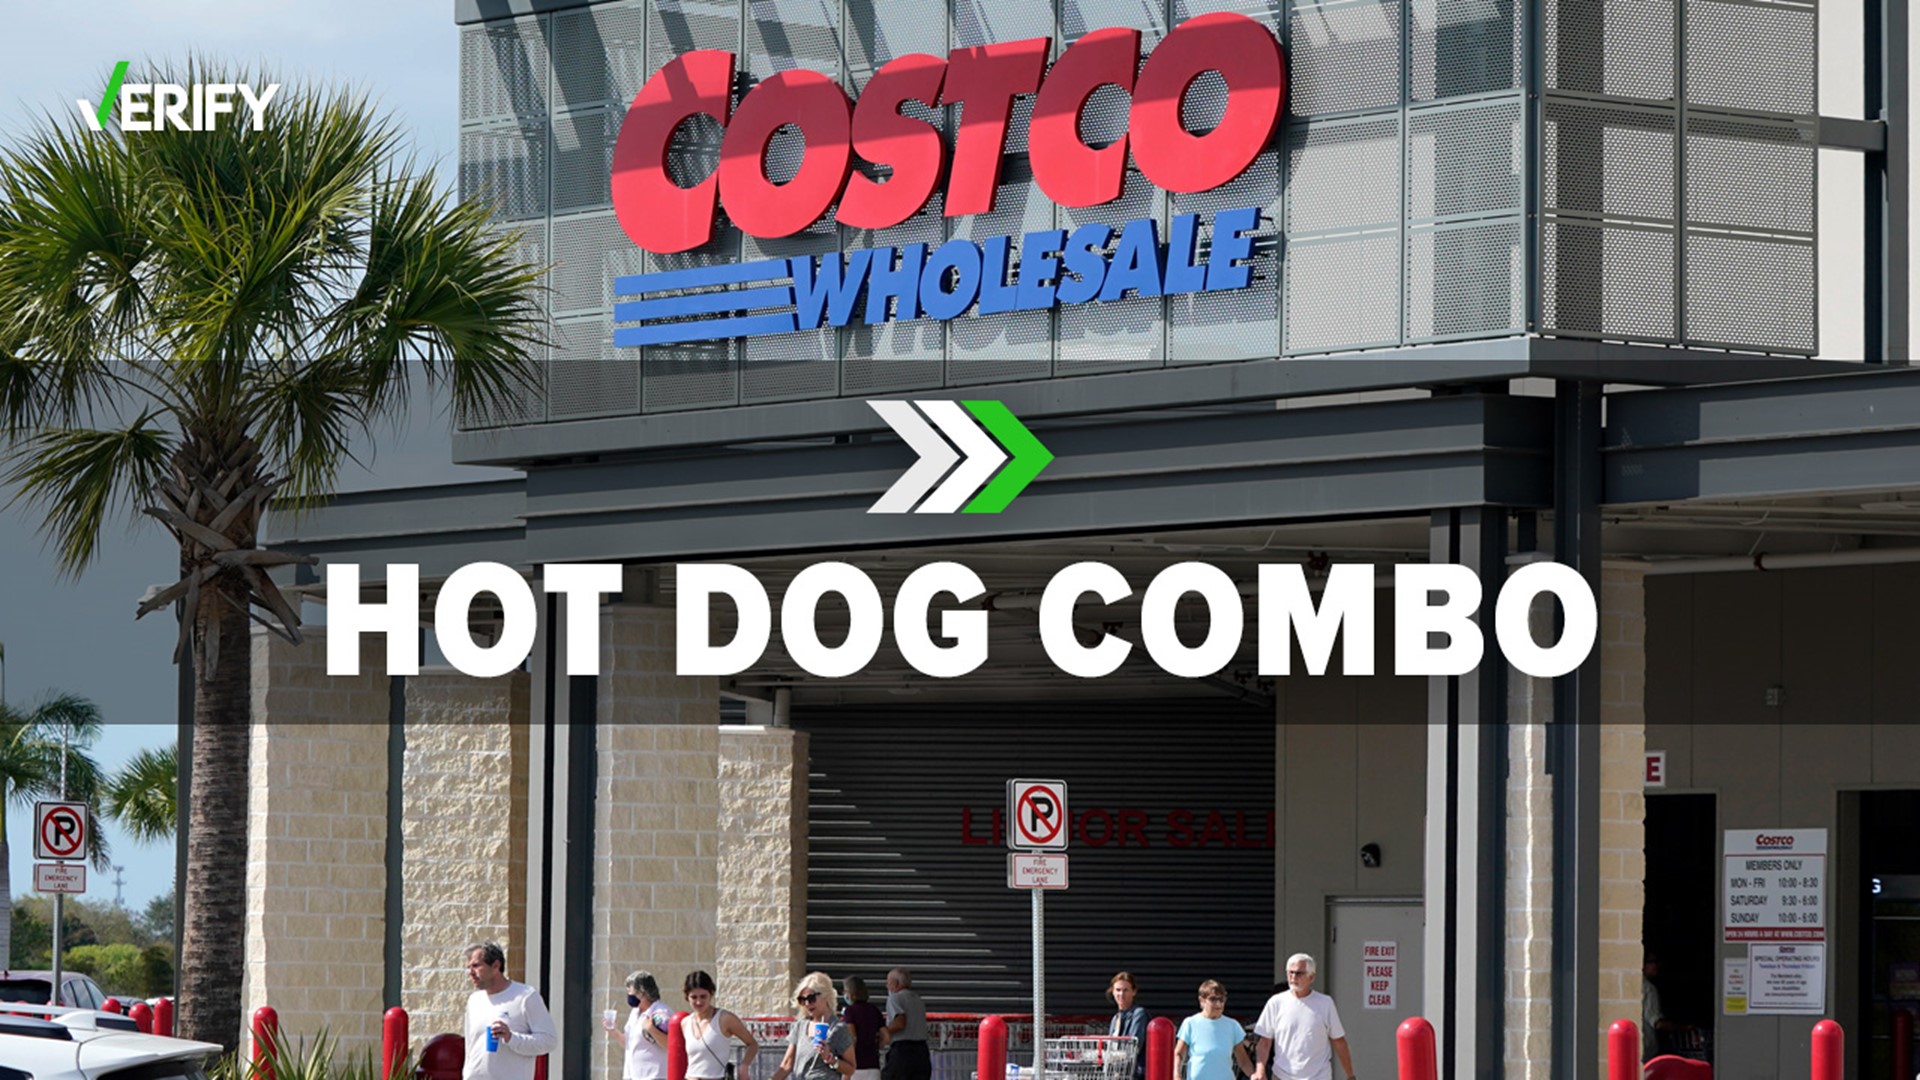 A viral tweet claiming Costco is planning to raise the price of its $1.50 hot dog combo meal due to inflation is “incorrect information,” the company says.